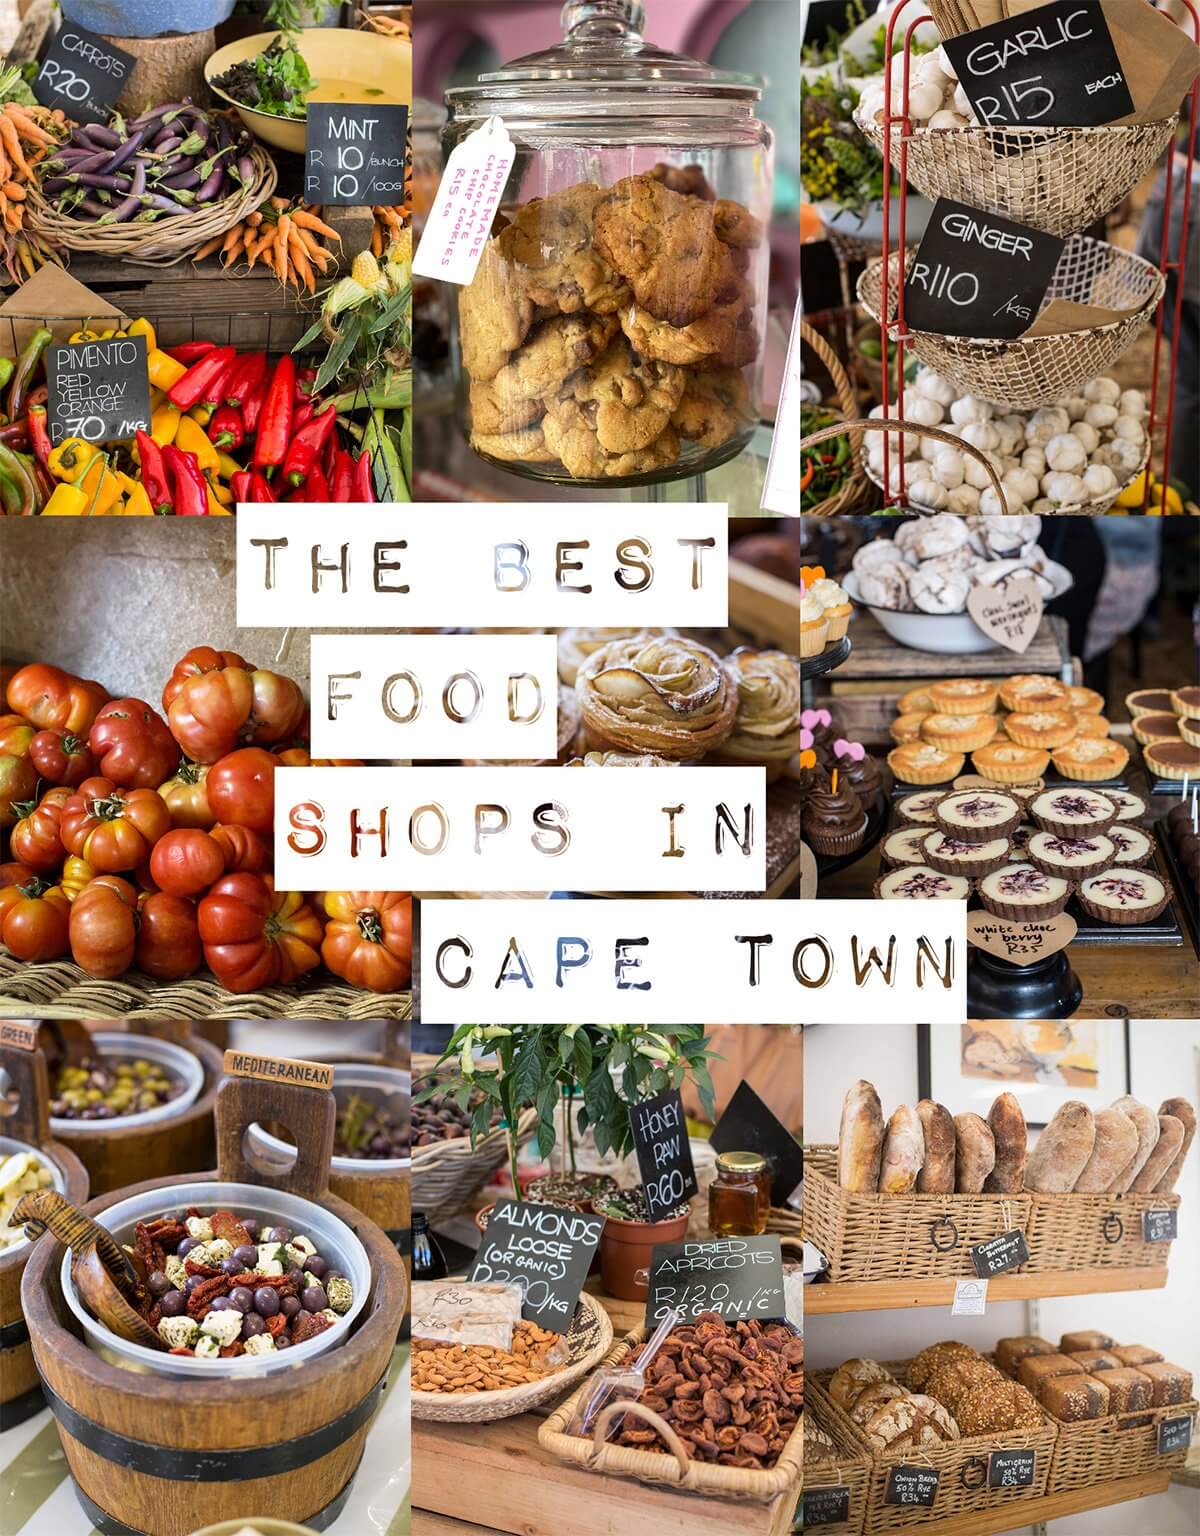 The best food shops in Cape Town